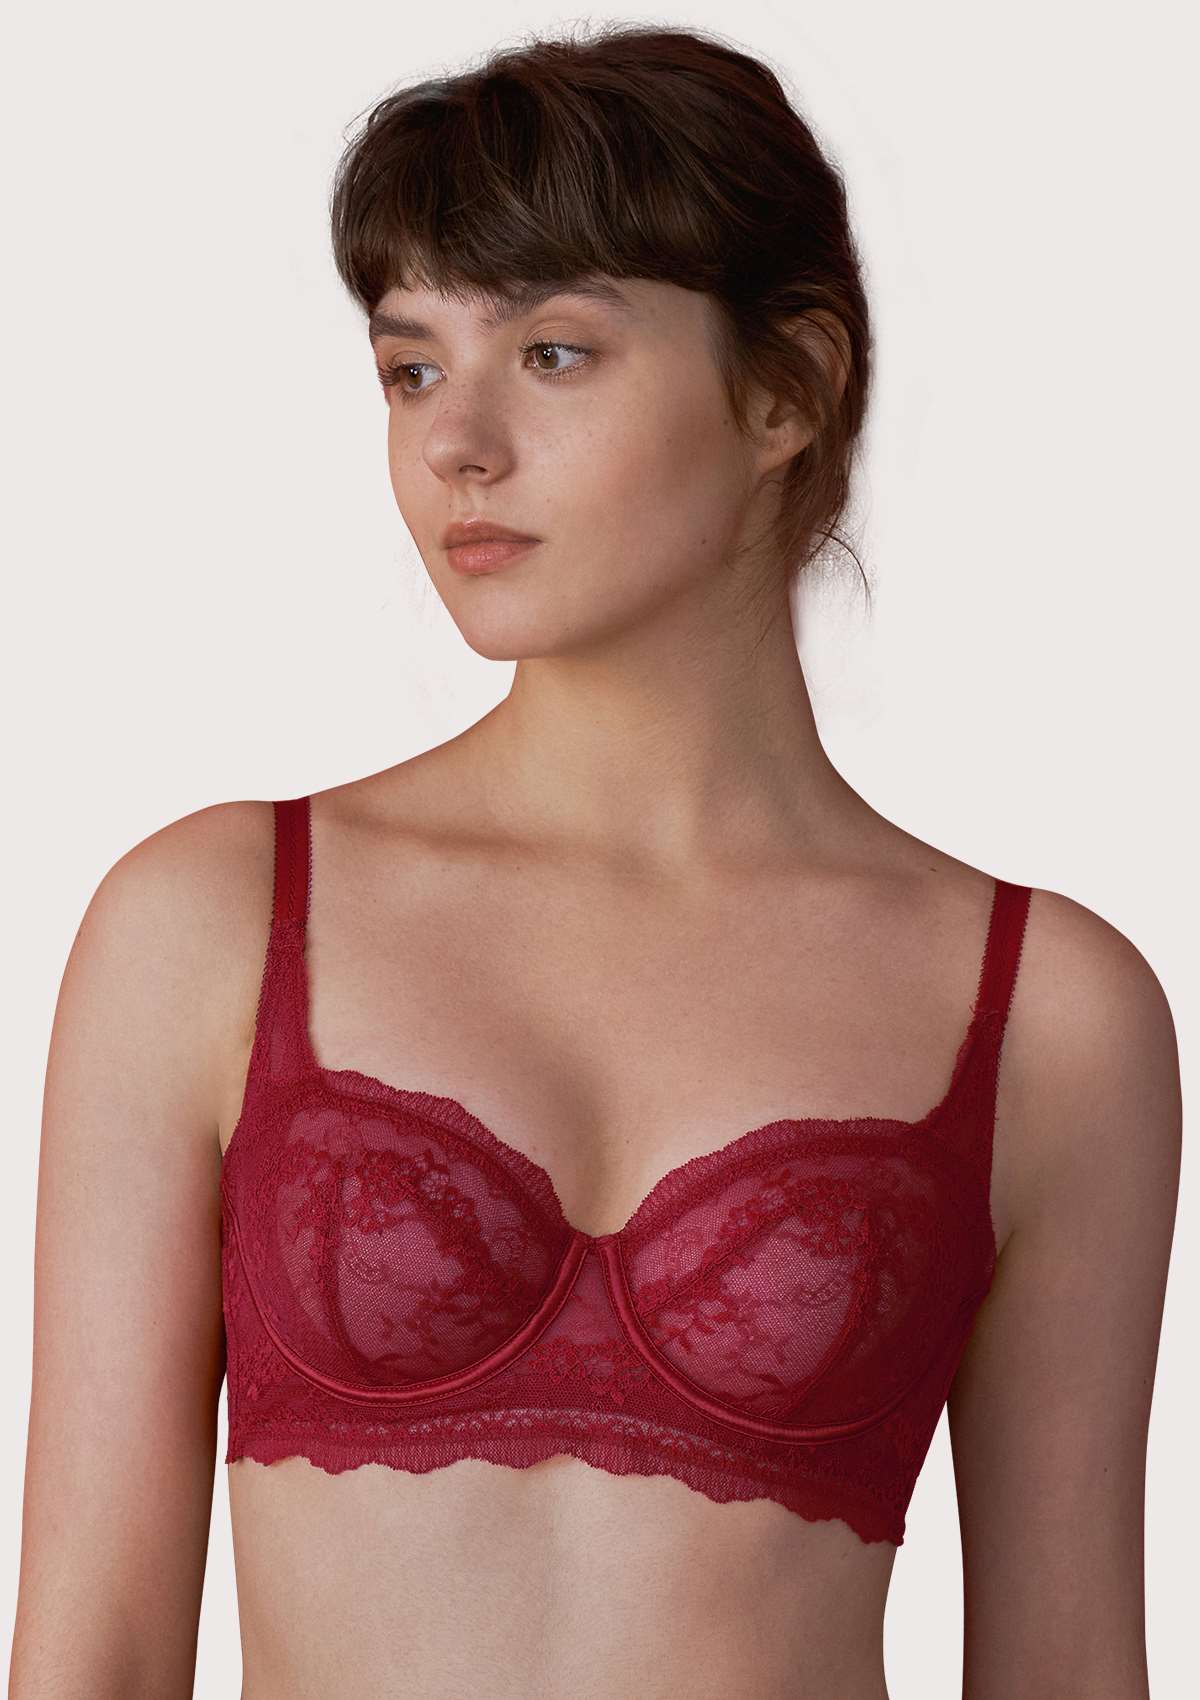 HSIA Floral Lace Unlined Bridal Balconette Bra Set - Supportive Classic - Burgundy / 38 / DDD/F